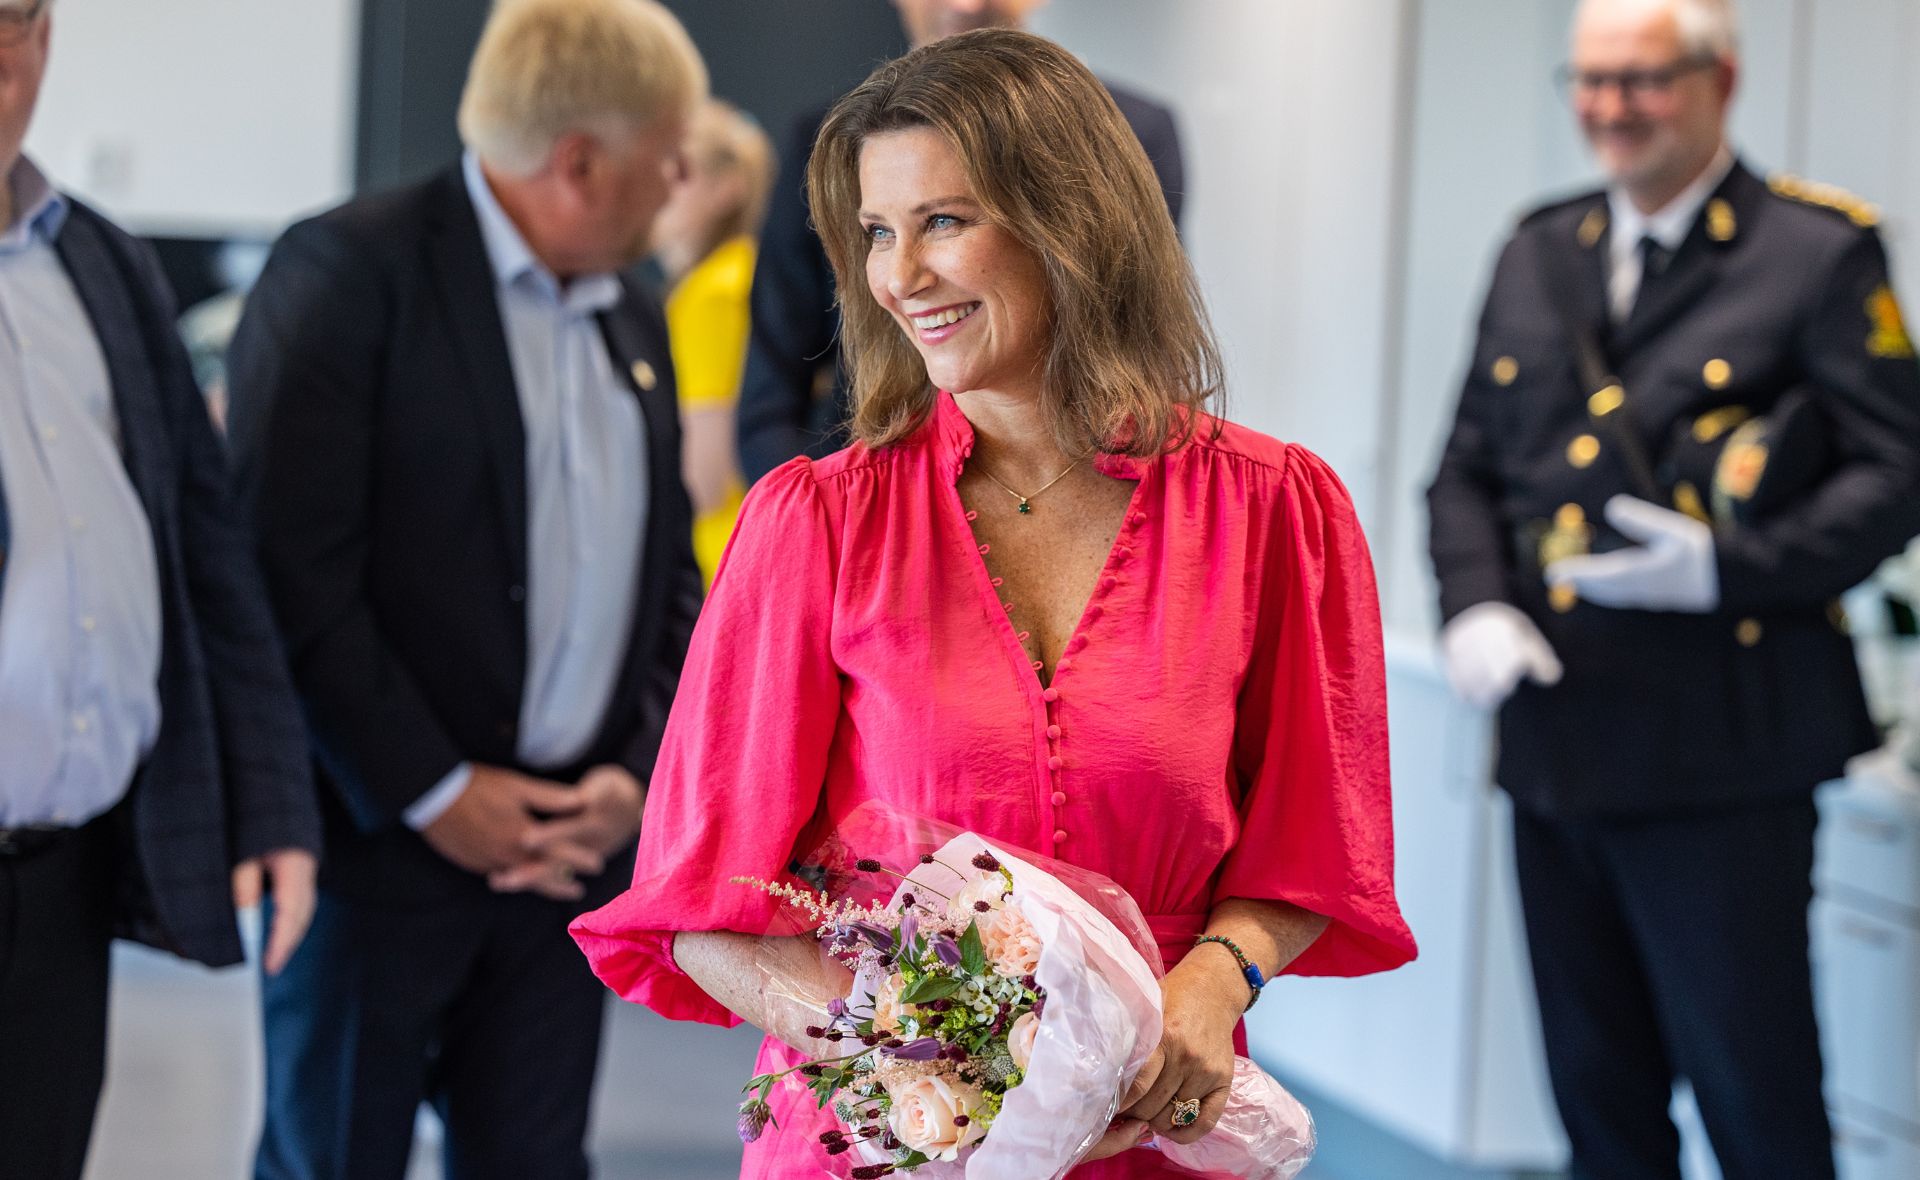 Norway’s Princess is saying goodbye to her royal duties months after “death threats”